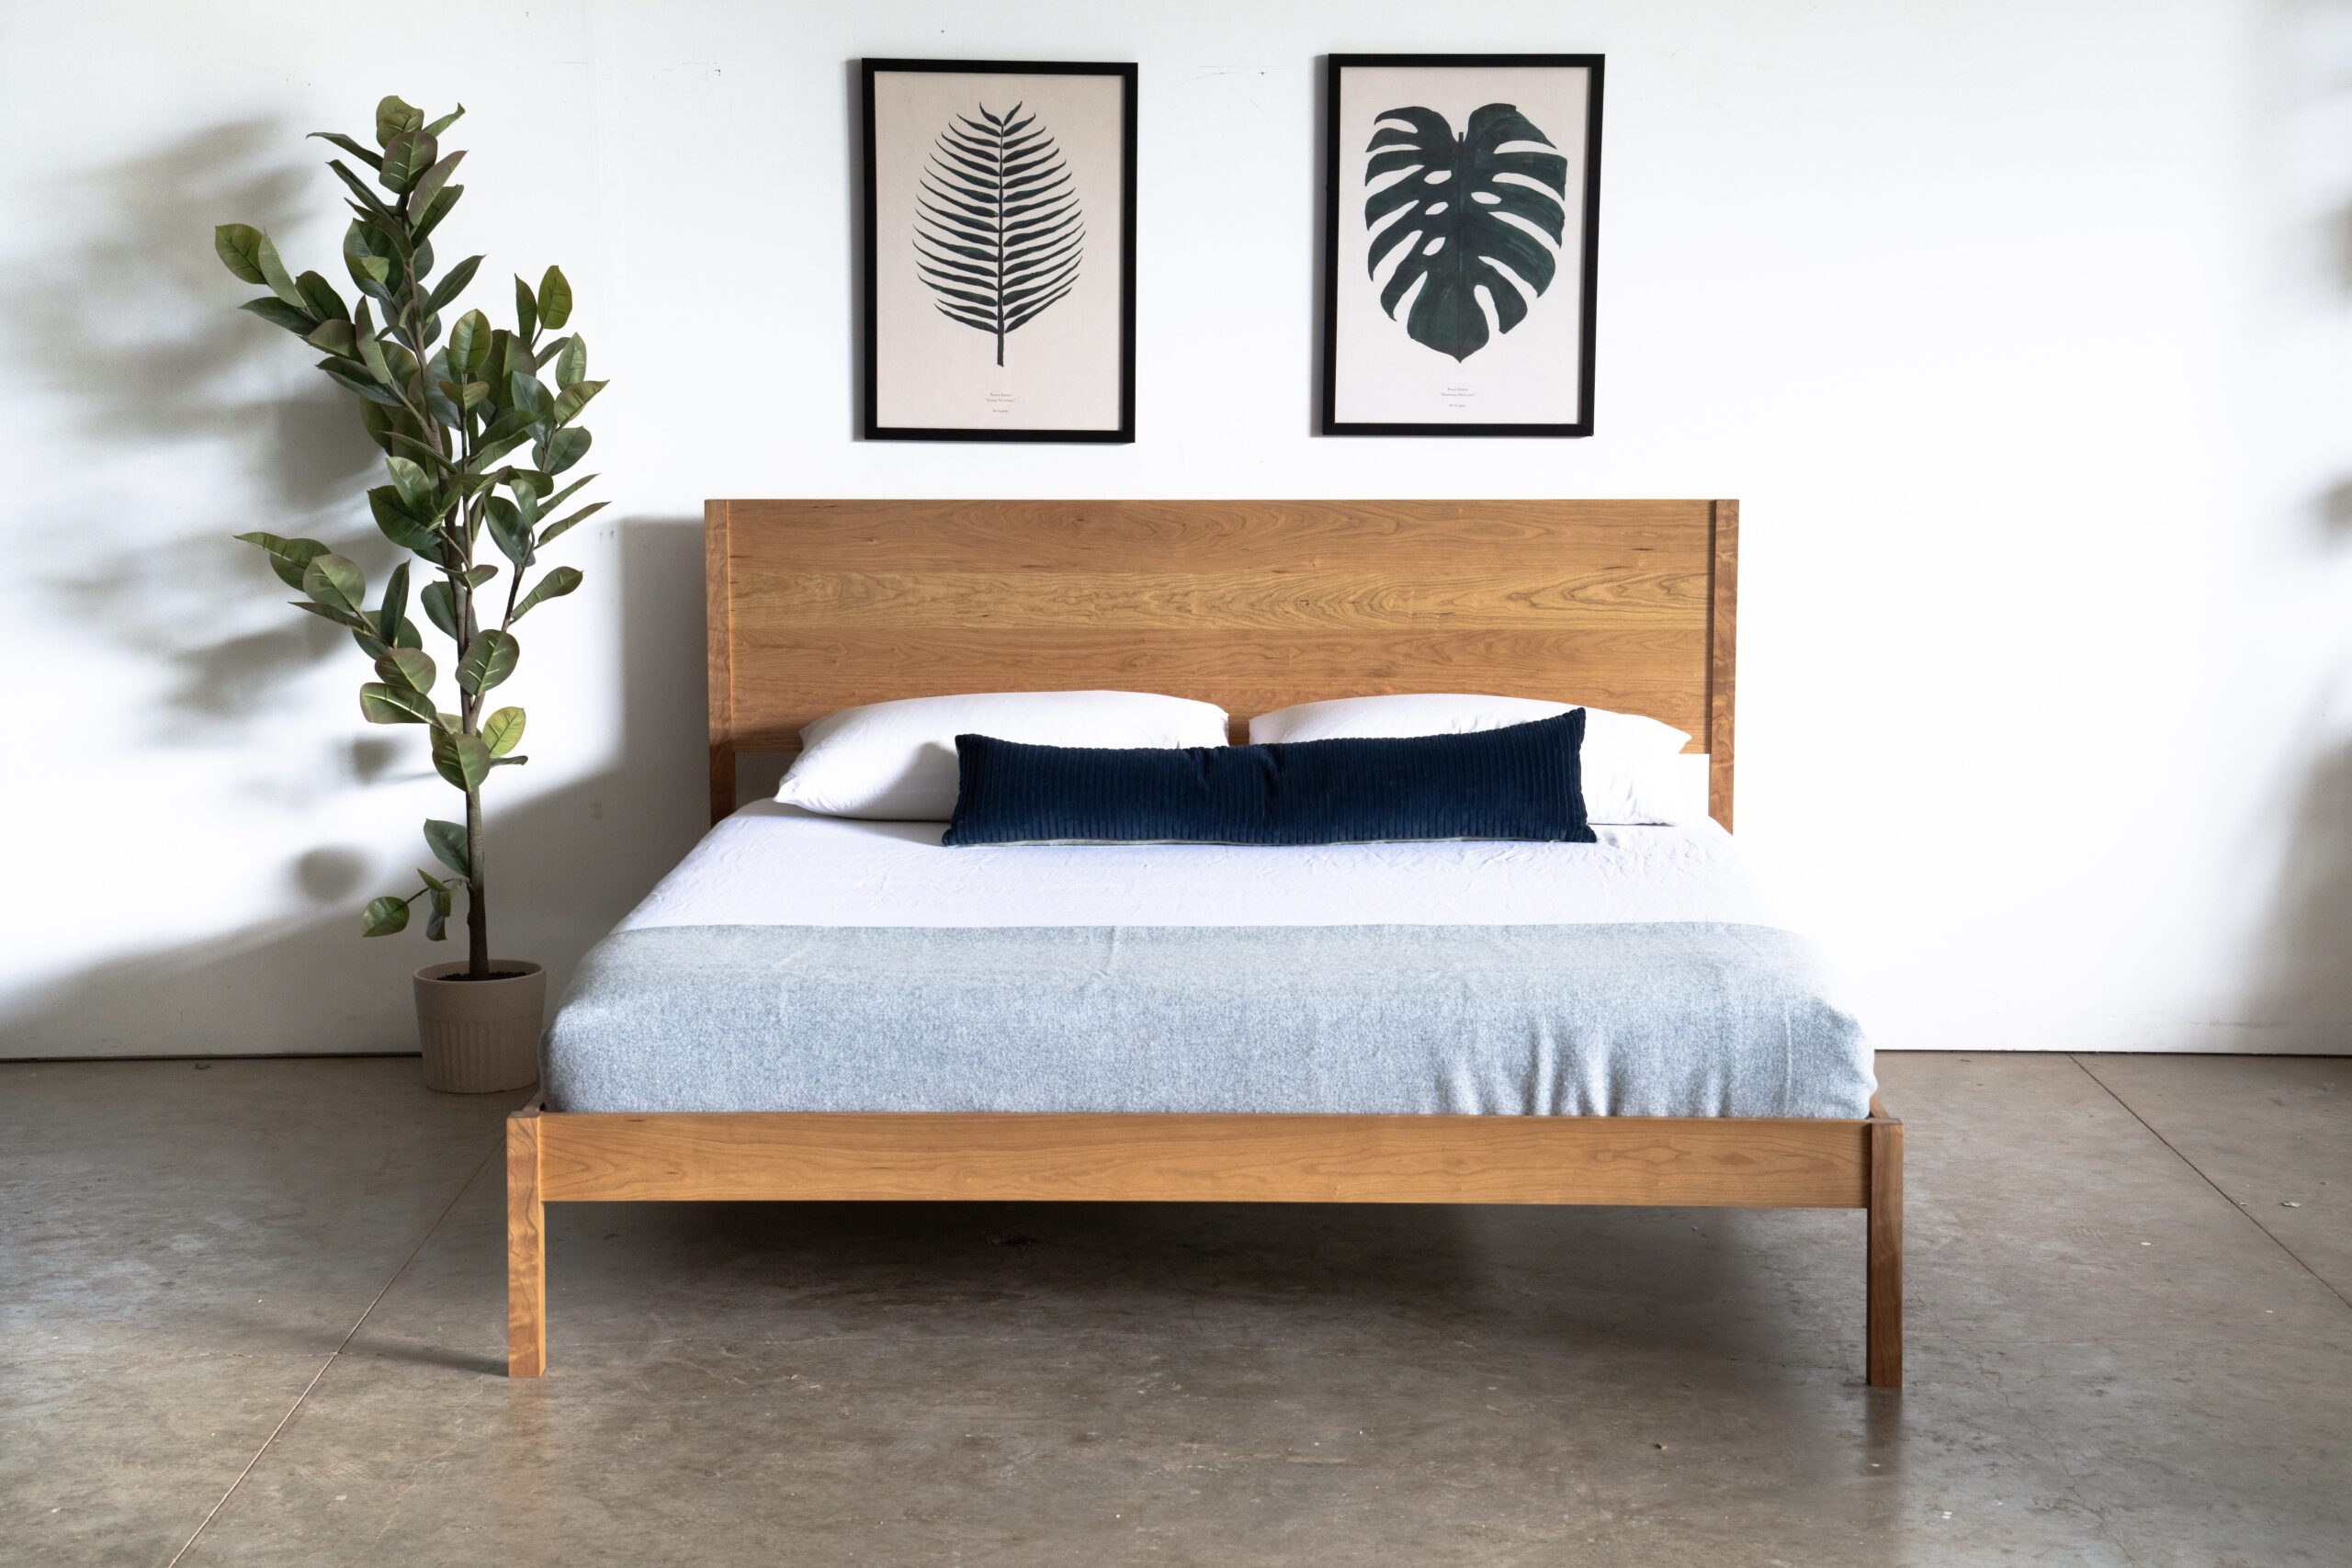 A simple solid cherry bed with a mattress and pillows next to a plant.